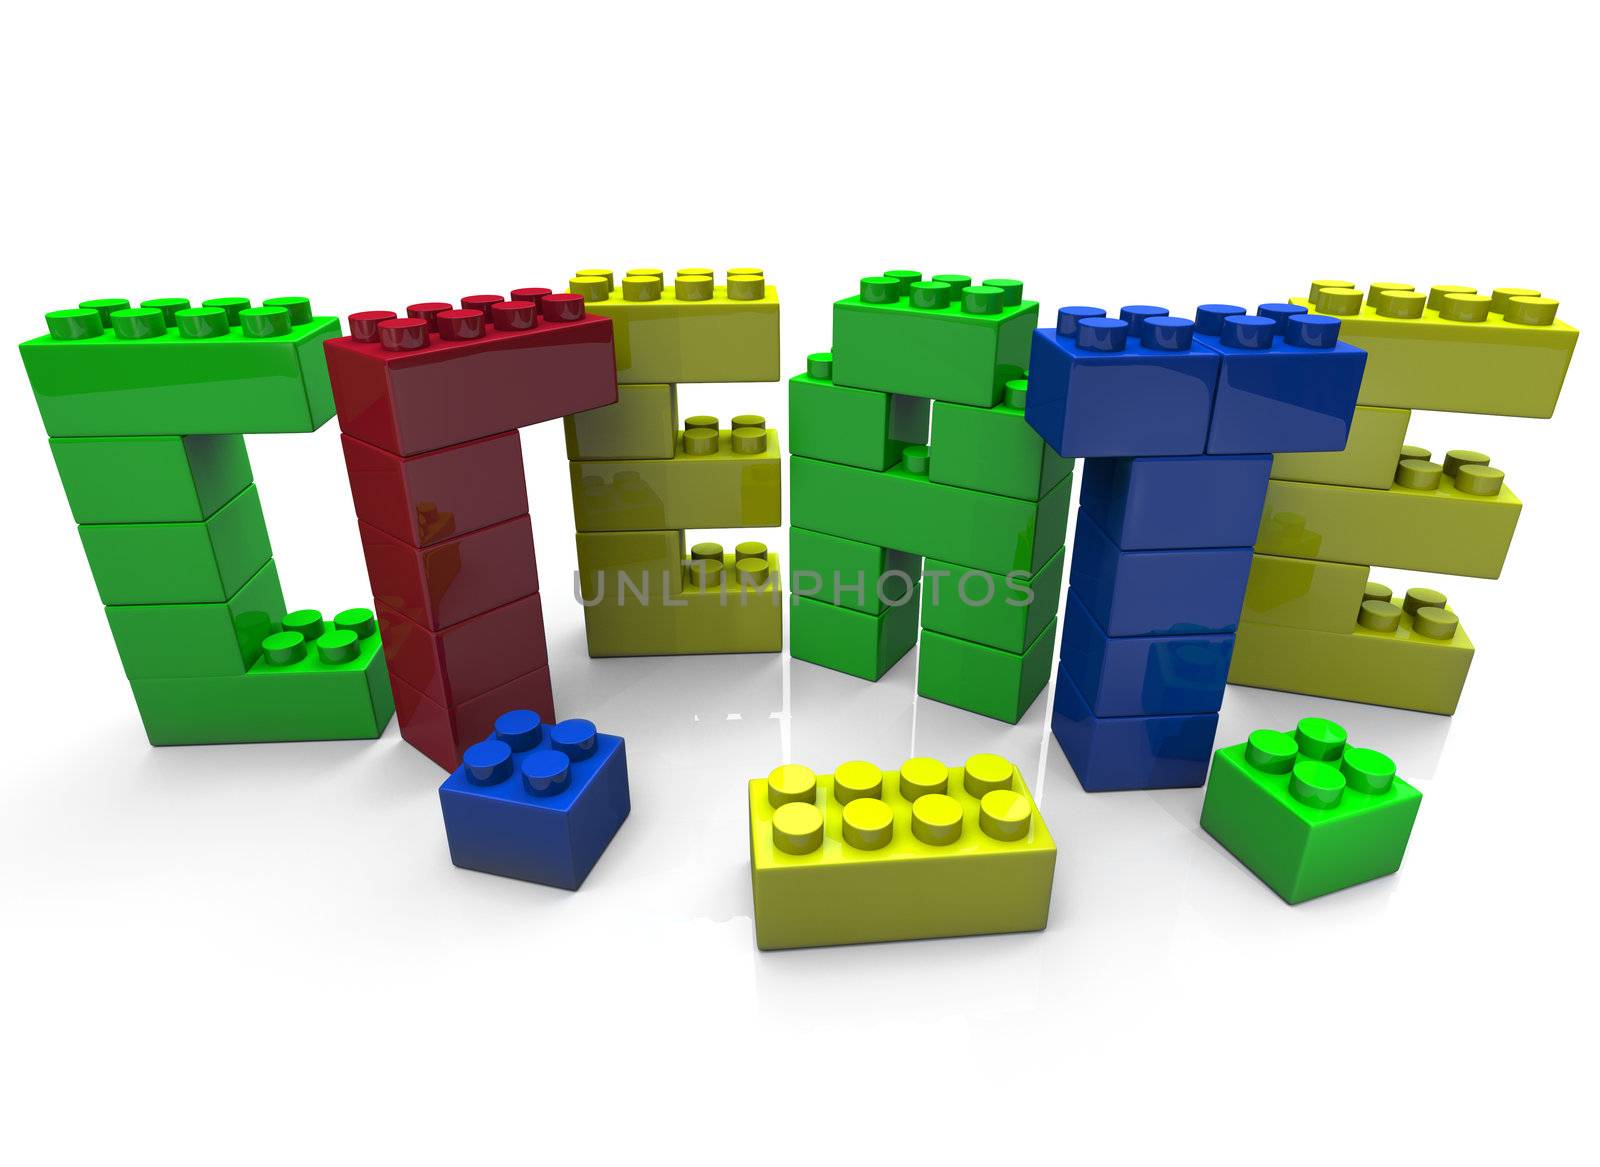 The word Create constructed with small plastic toy blocks of several colors, symbolizing creativity and imagination